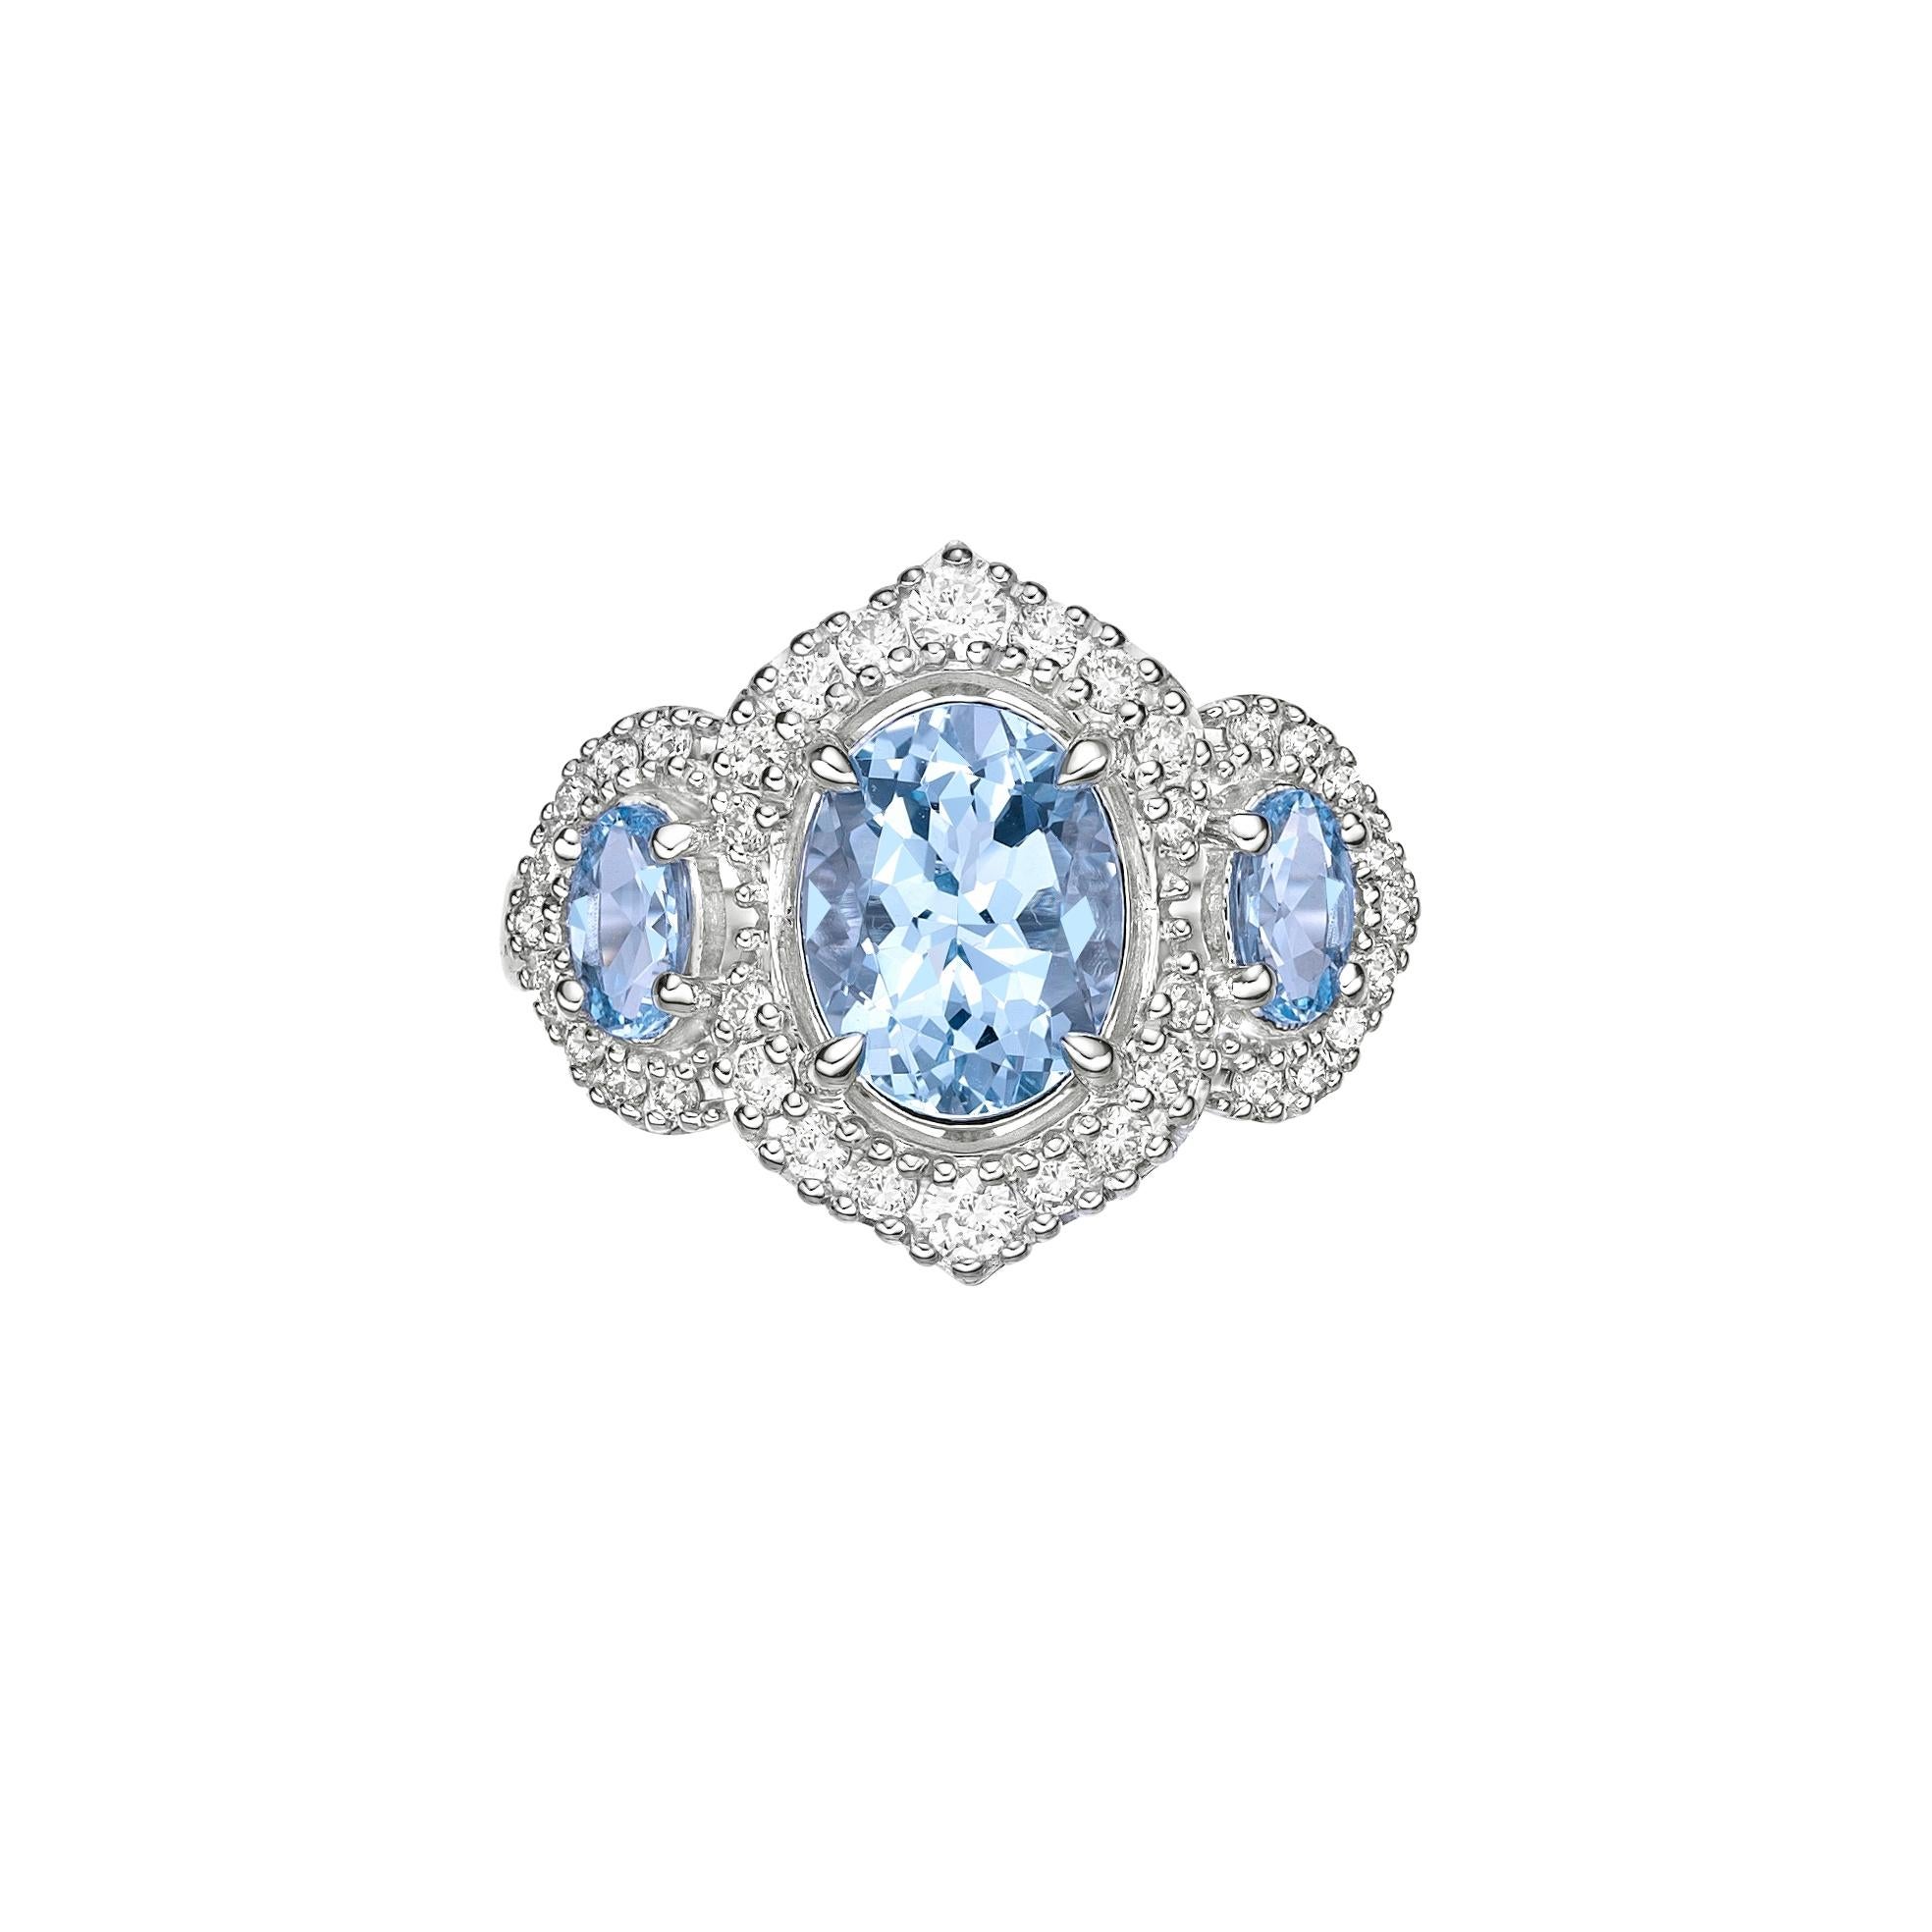 Contemporary 1.54 Carat Aquamarine Fancy Ring in 18Karat White Gold with White Diamond.   For Sale